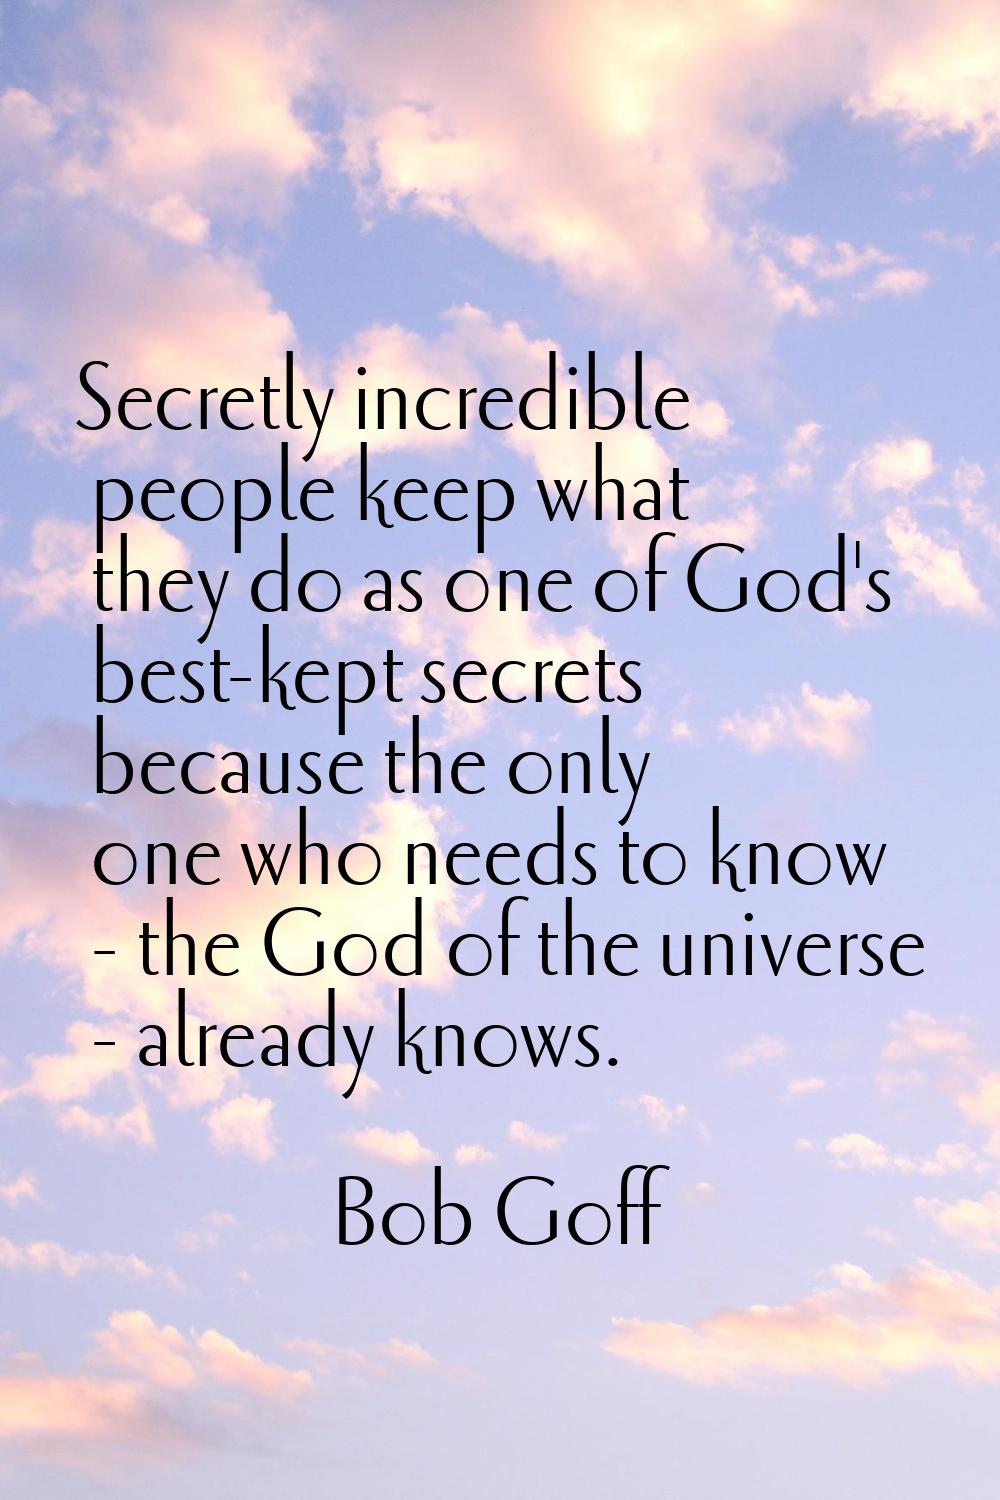 Secretly incredible people keep what they do as one of God's best-kept secrets because the only one